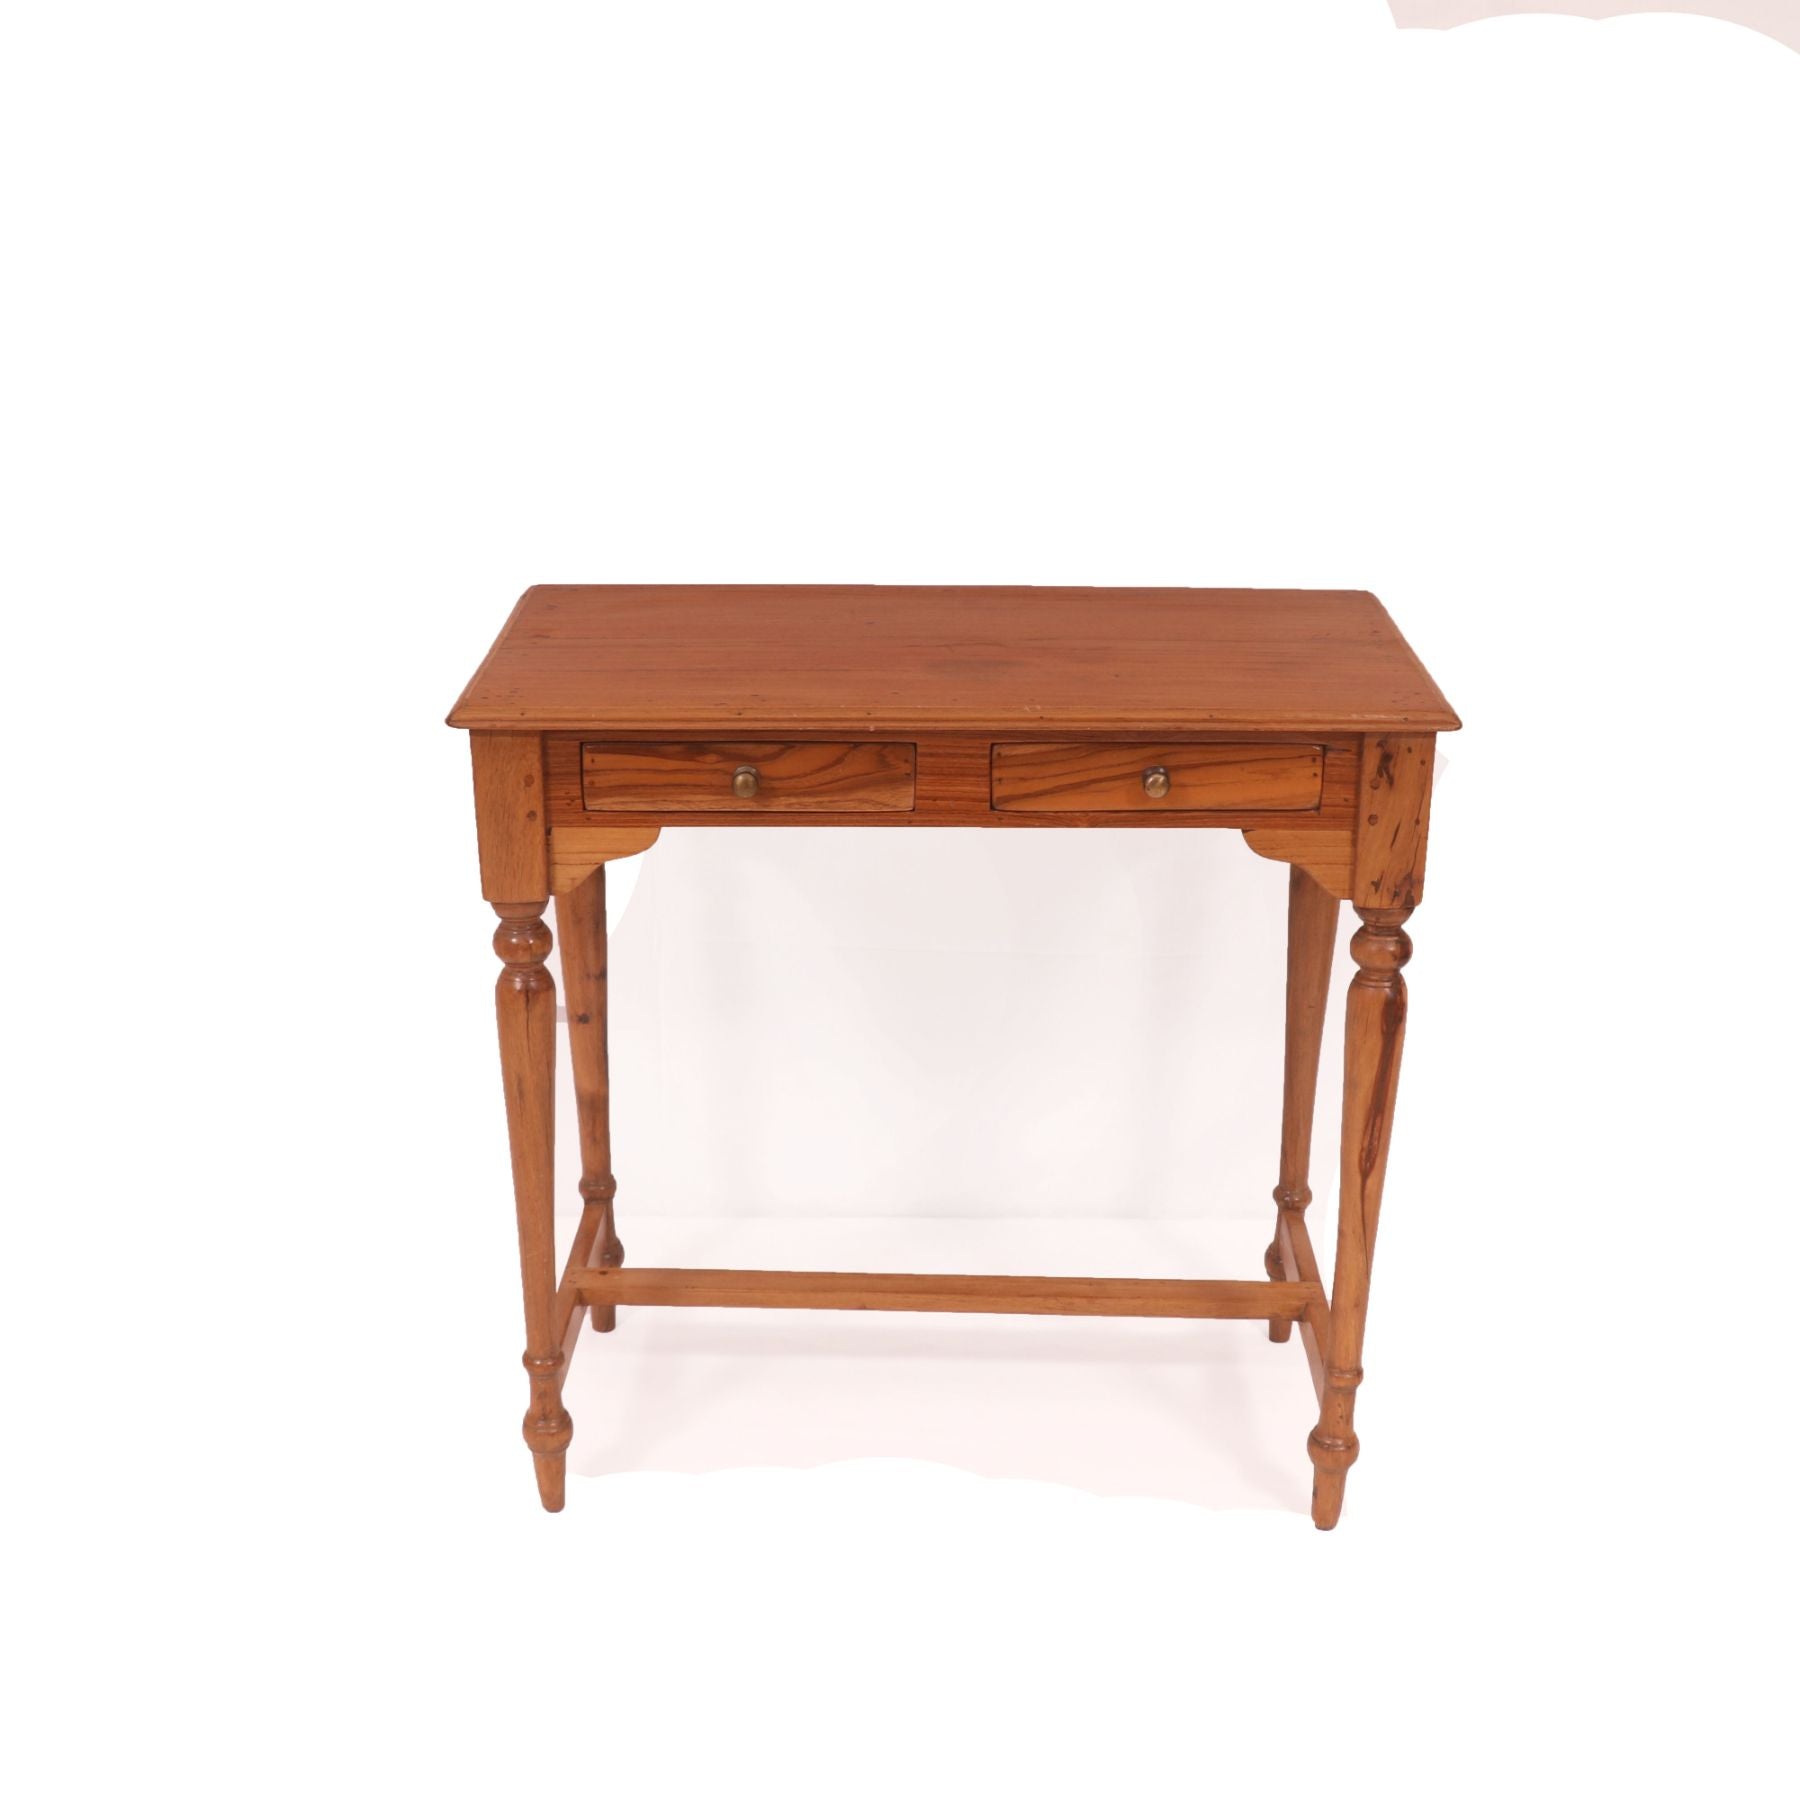 Charming Solid Wood Study Table Desk Study Table